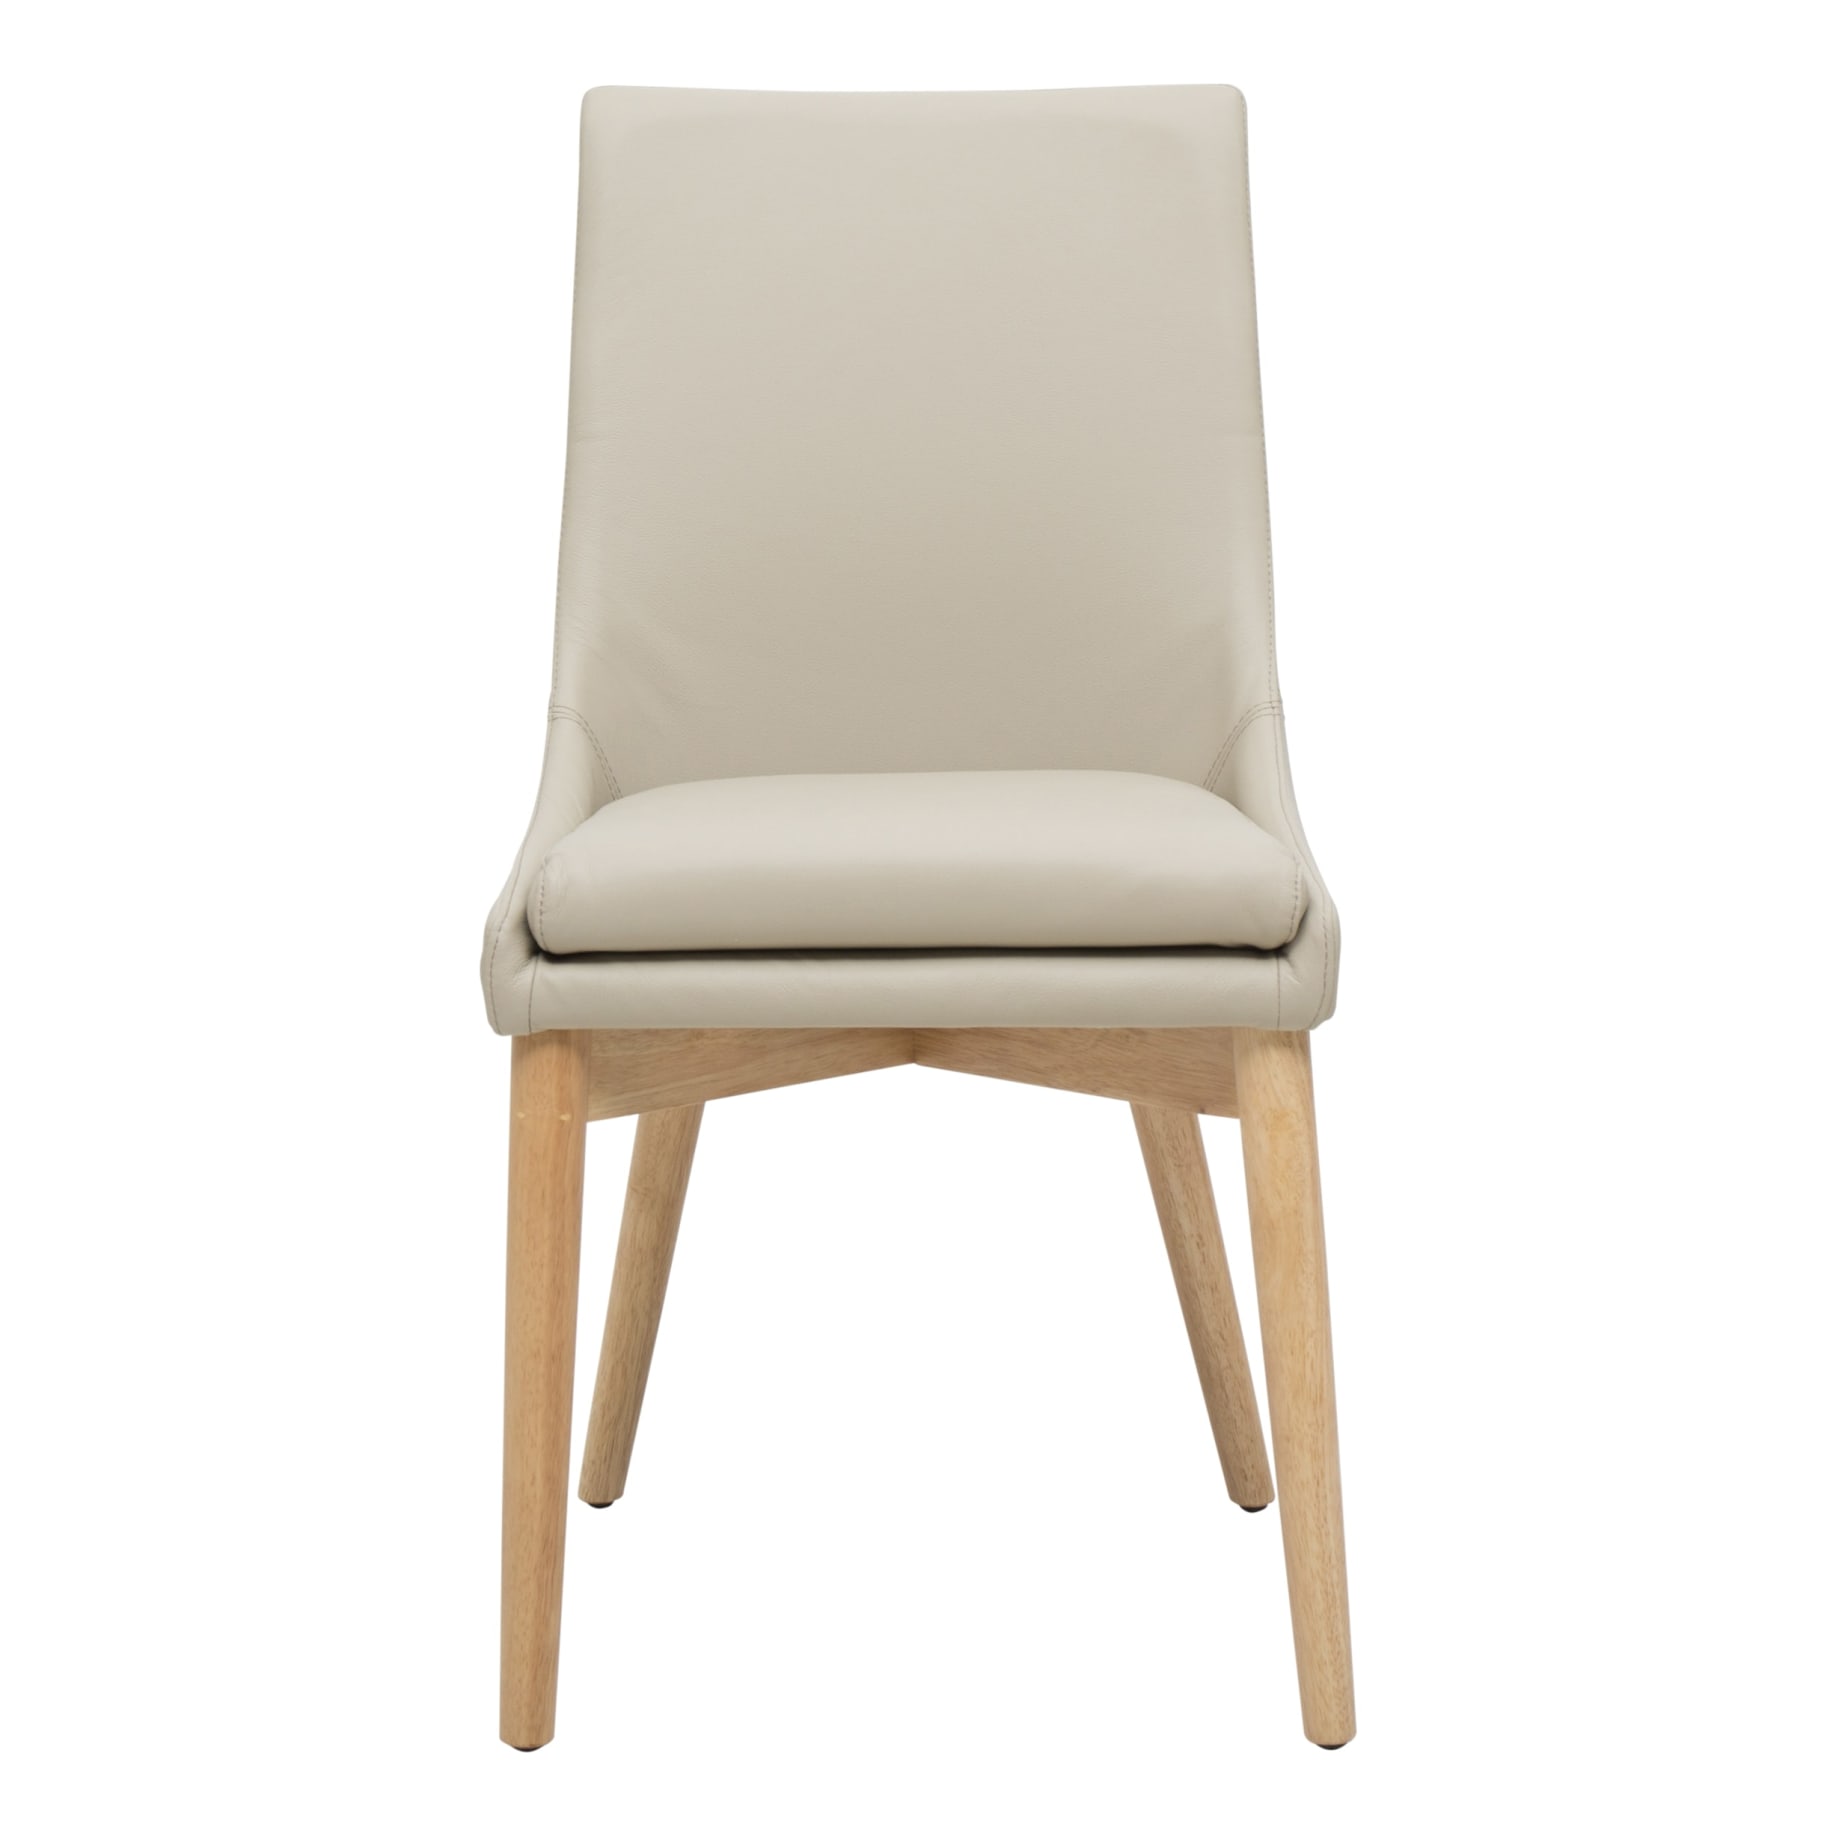 Highland Dining Chair in Leather Light Mocha / Clear Lacquer